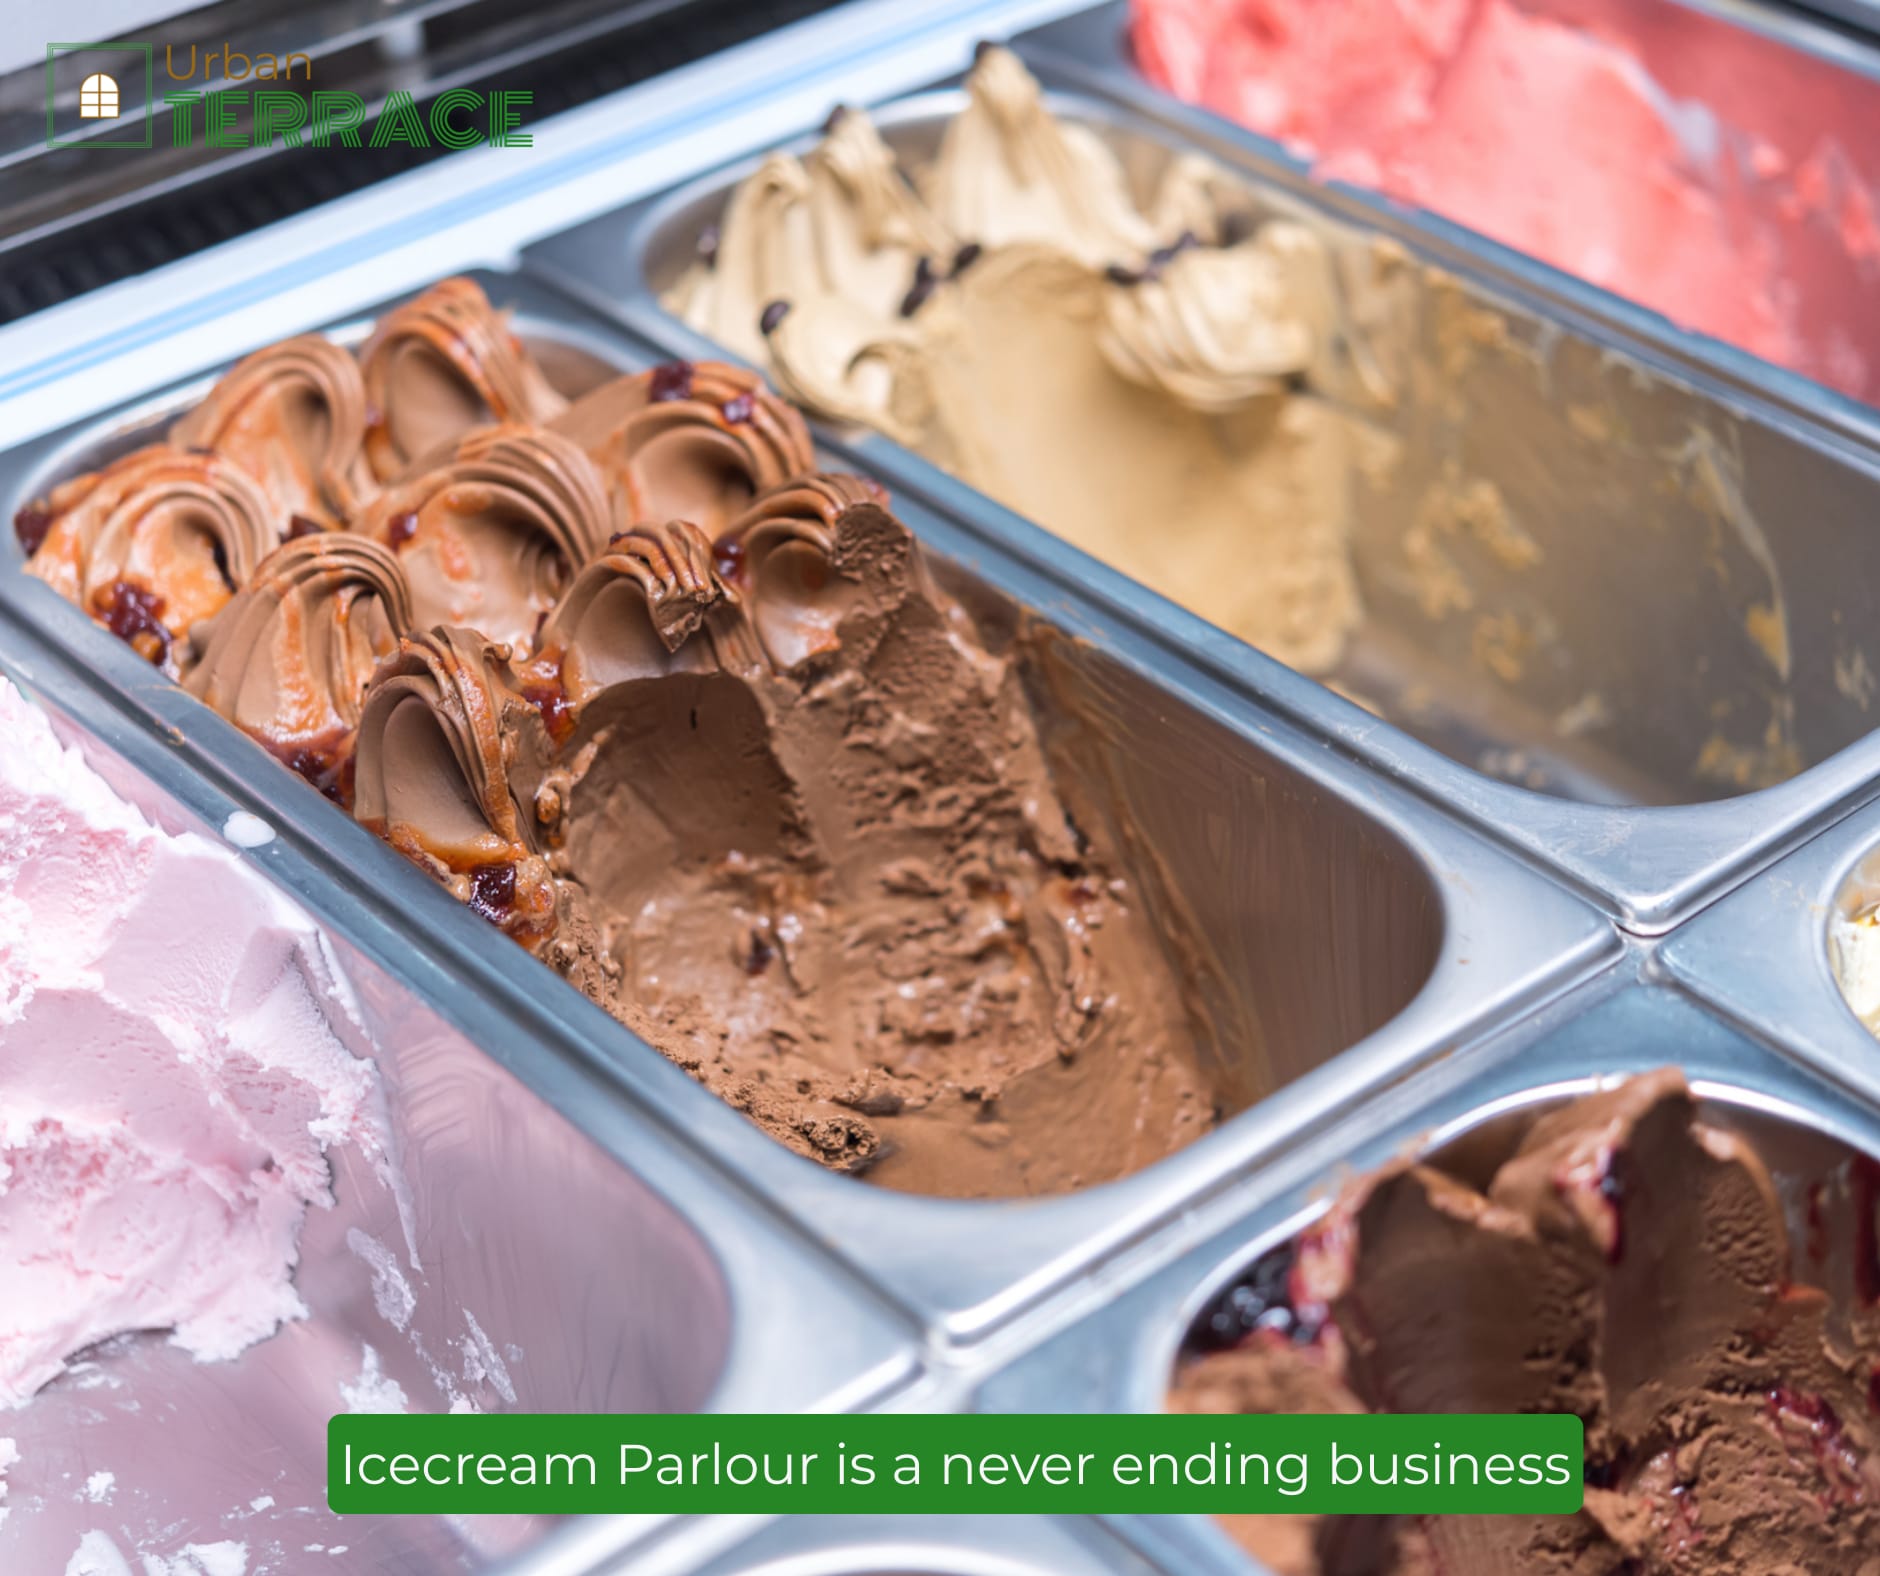 icecream parlour for sale at 56 dukan indore by urban terrace